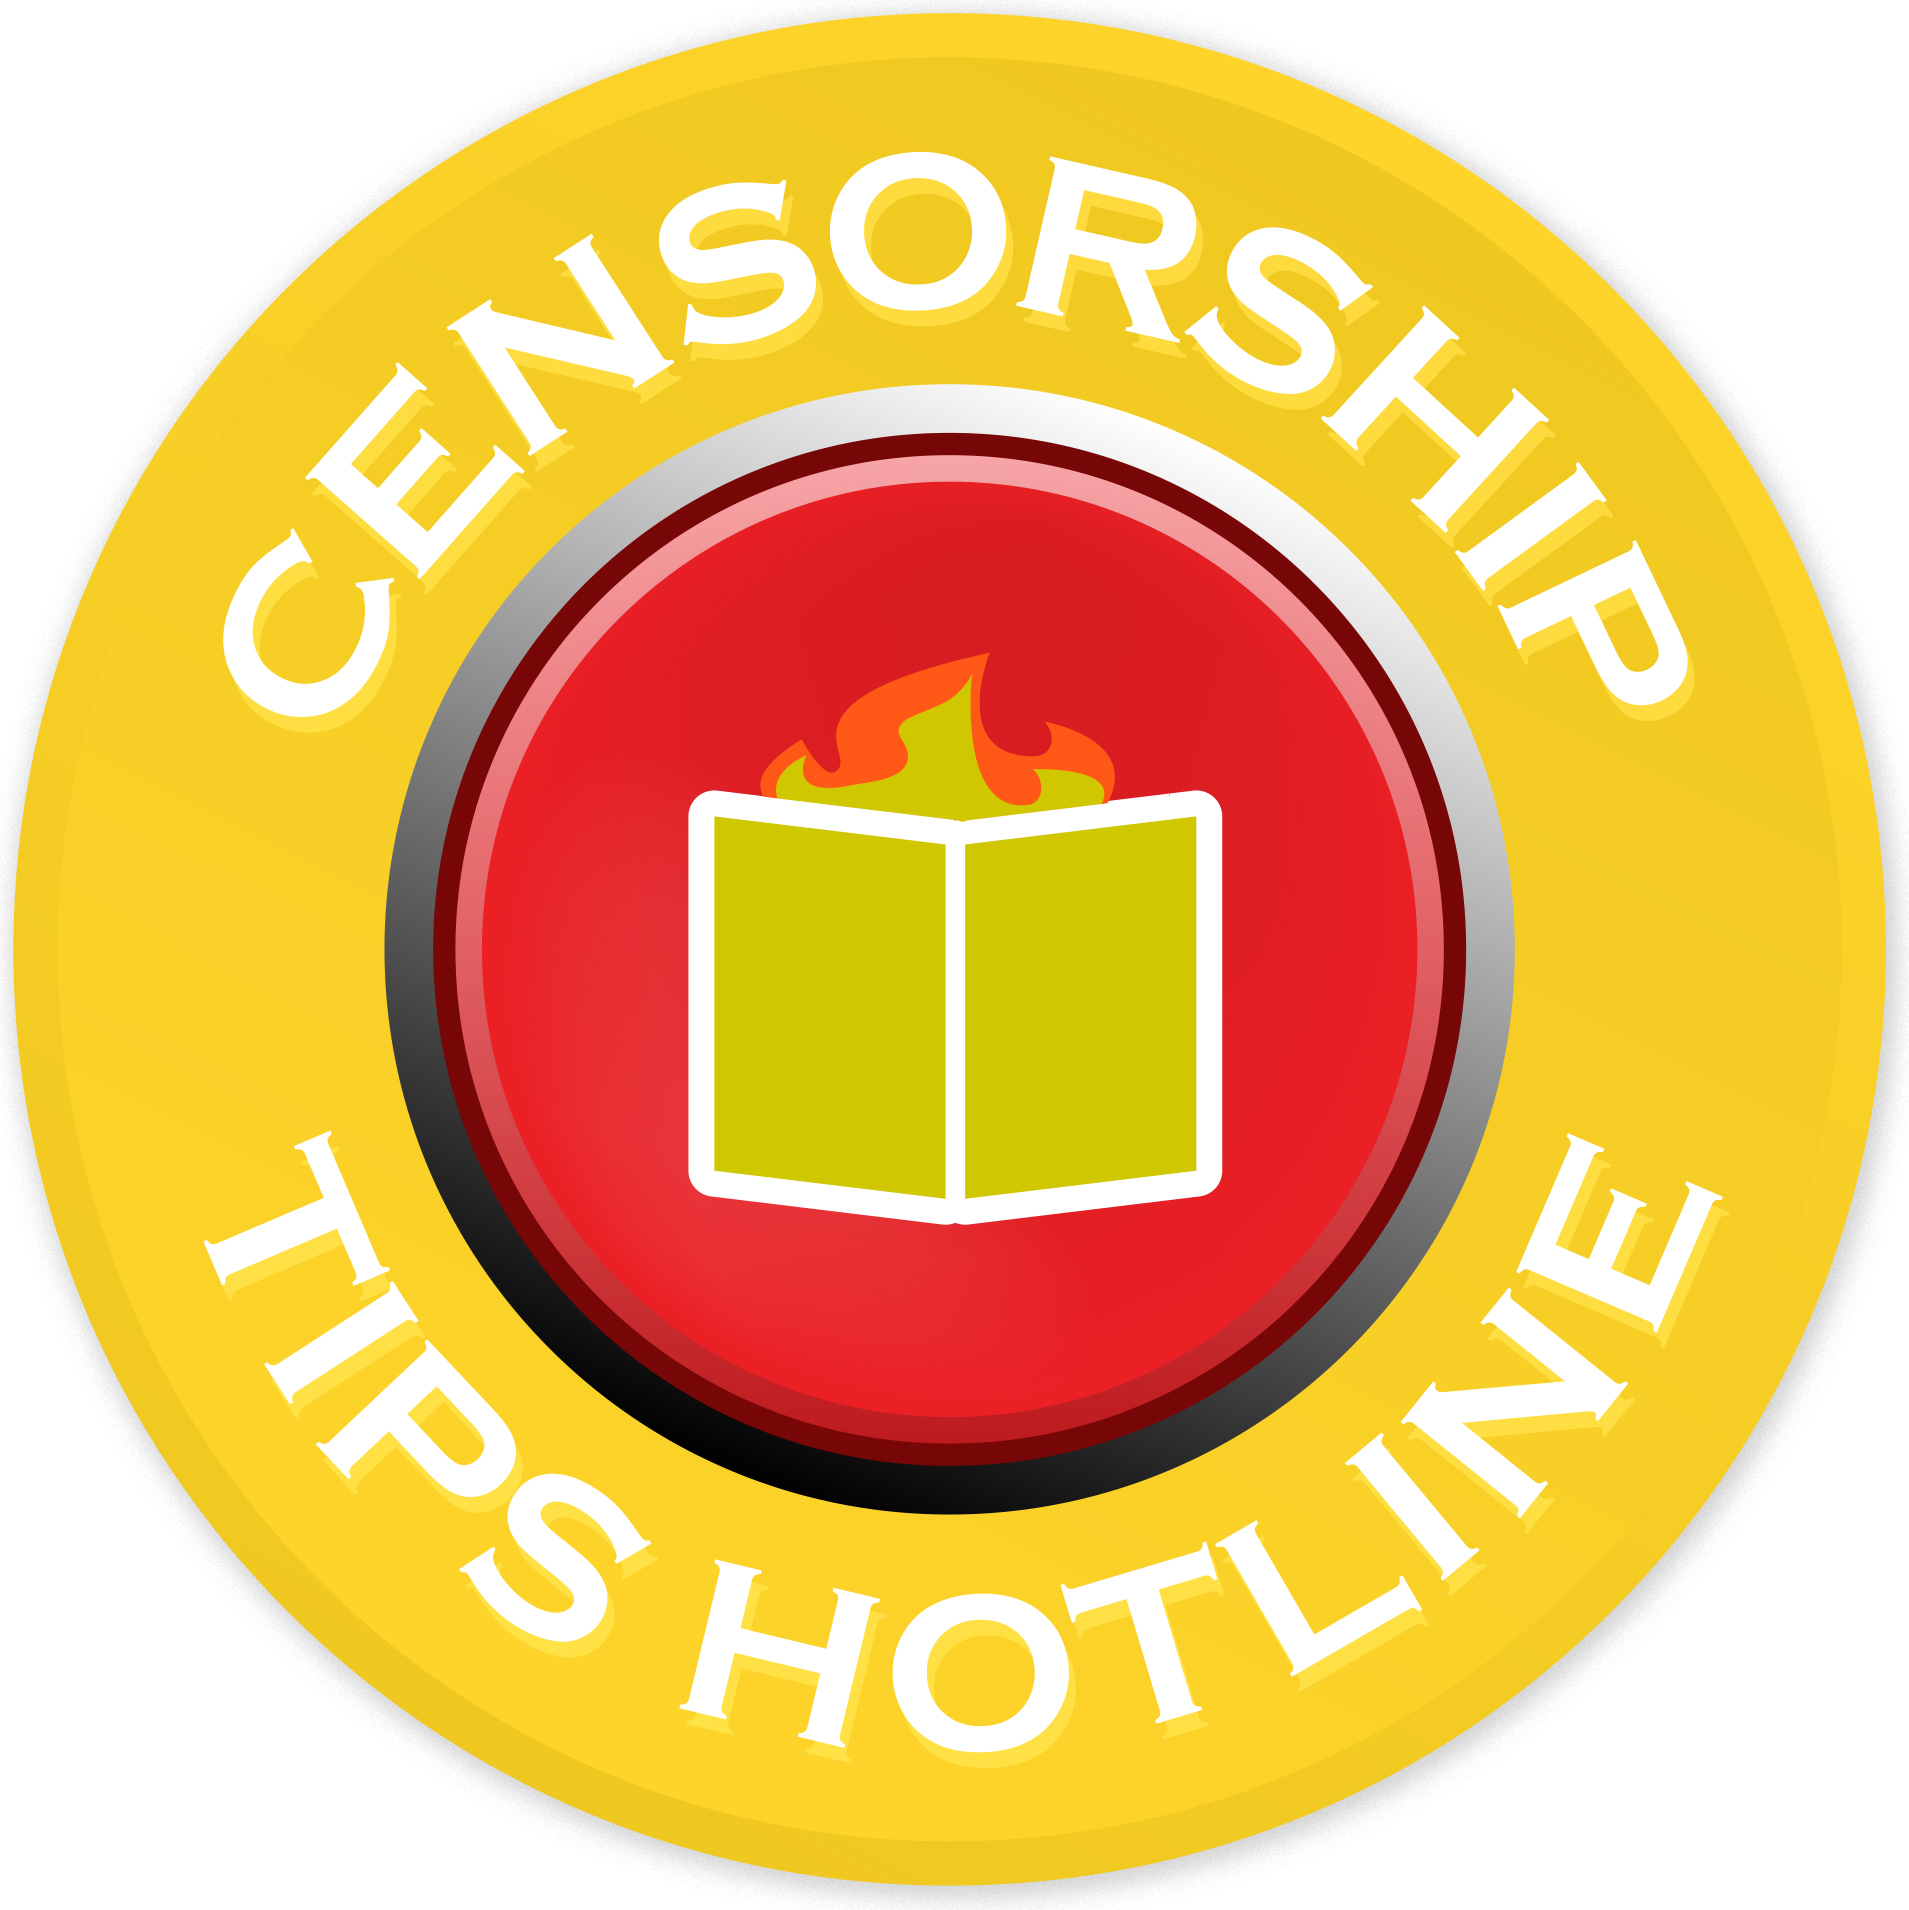 Is Your Library Experiencing Censorship?